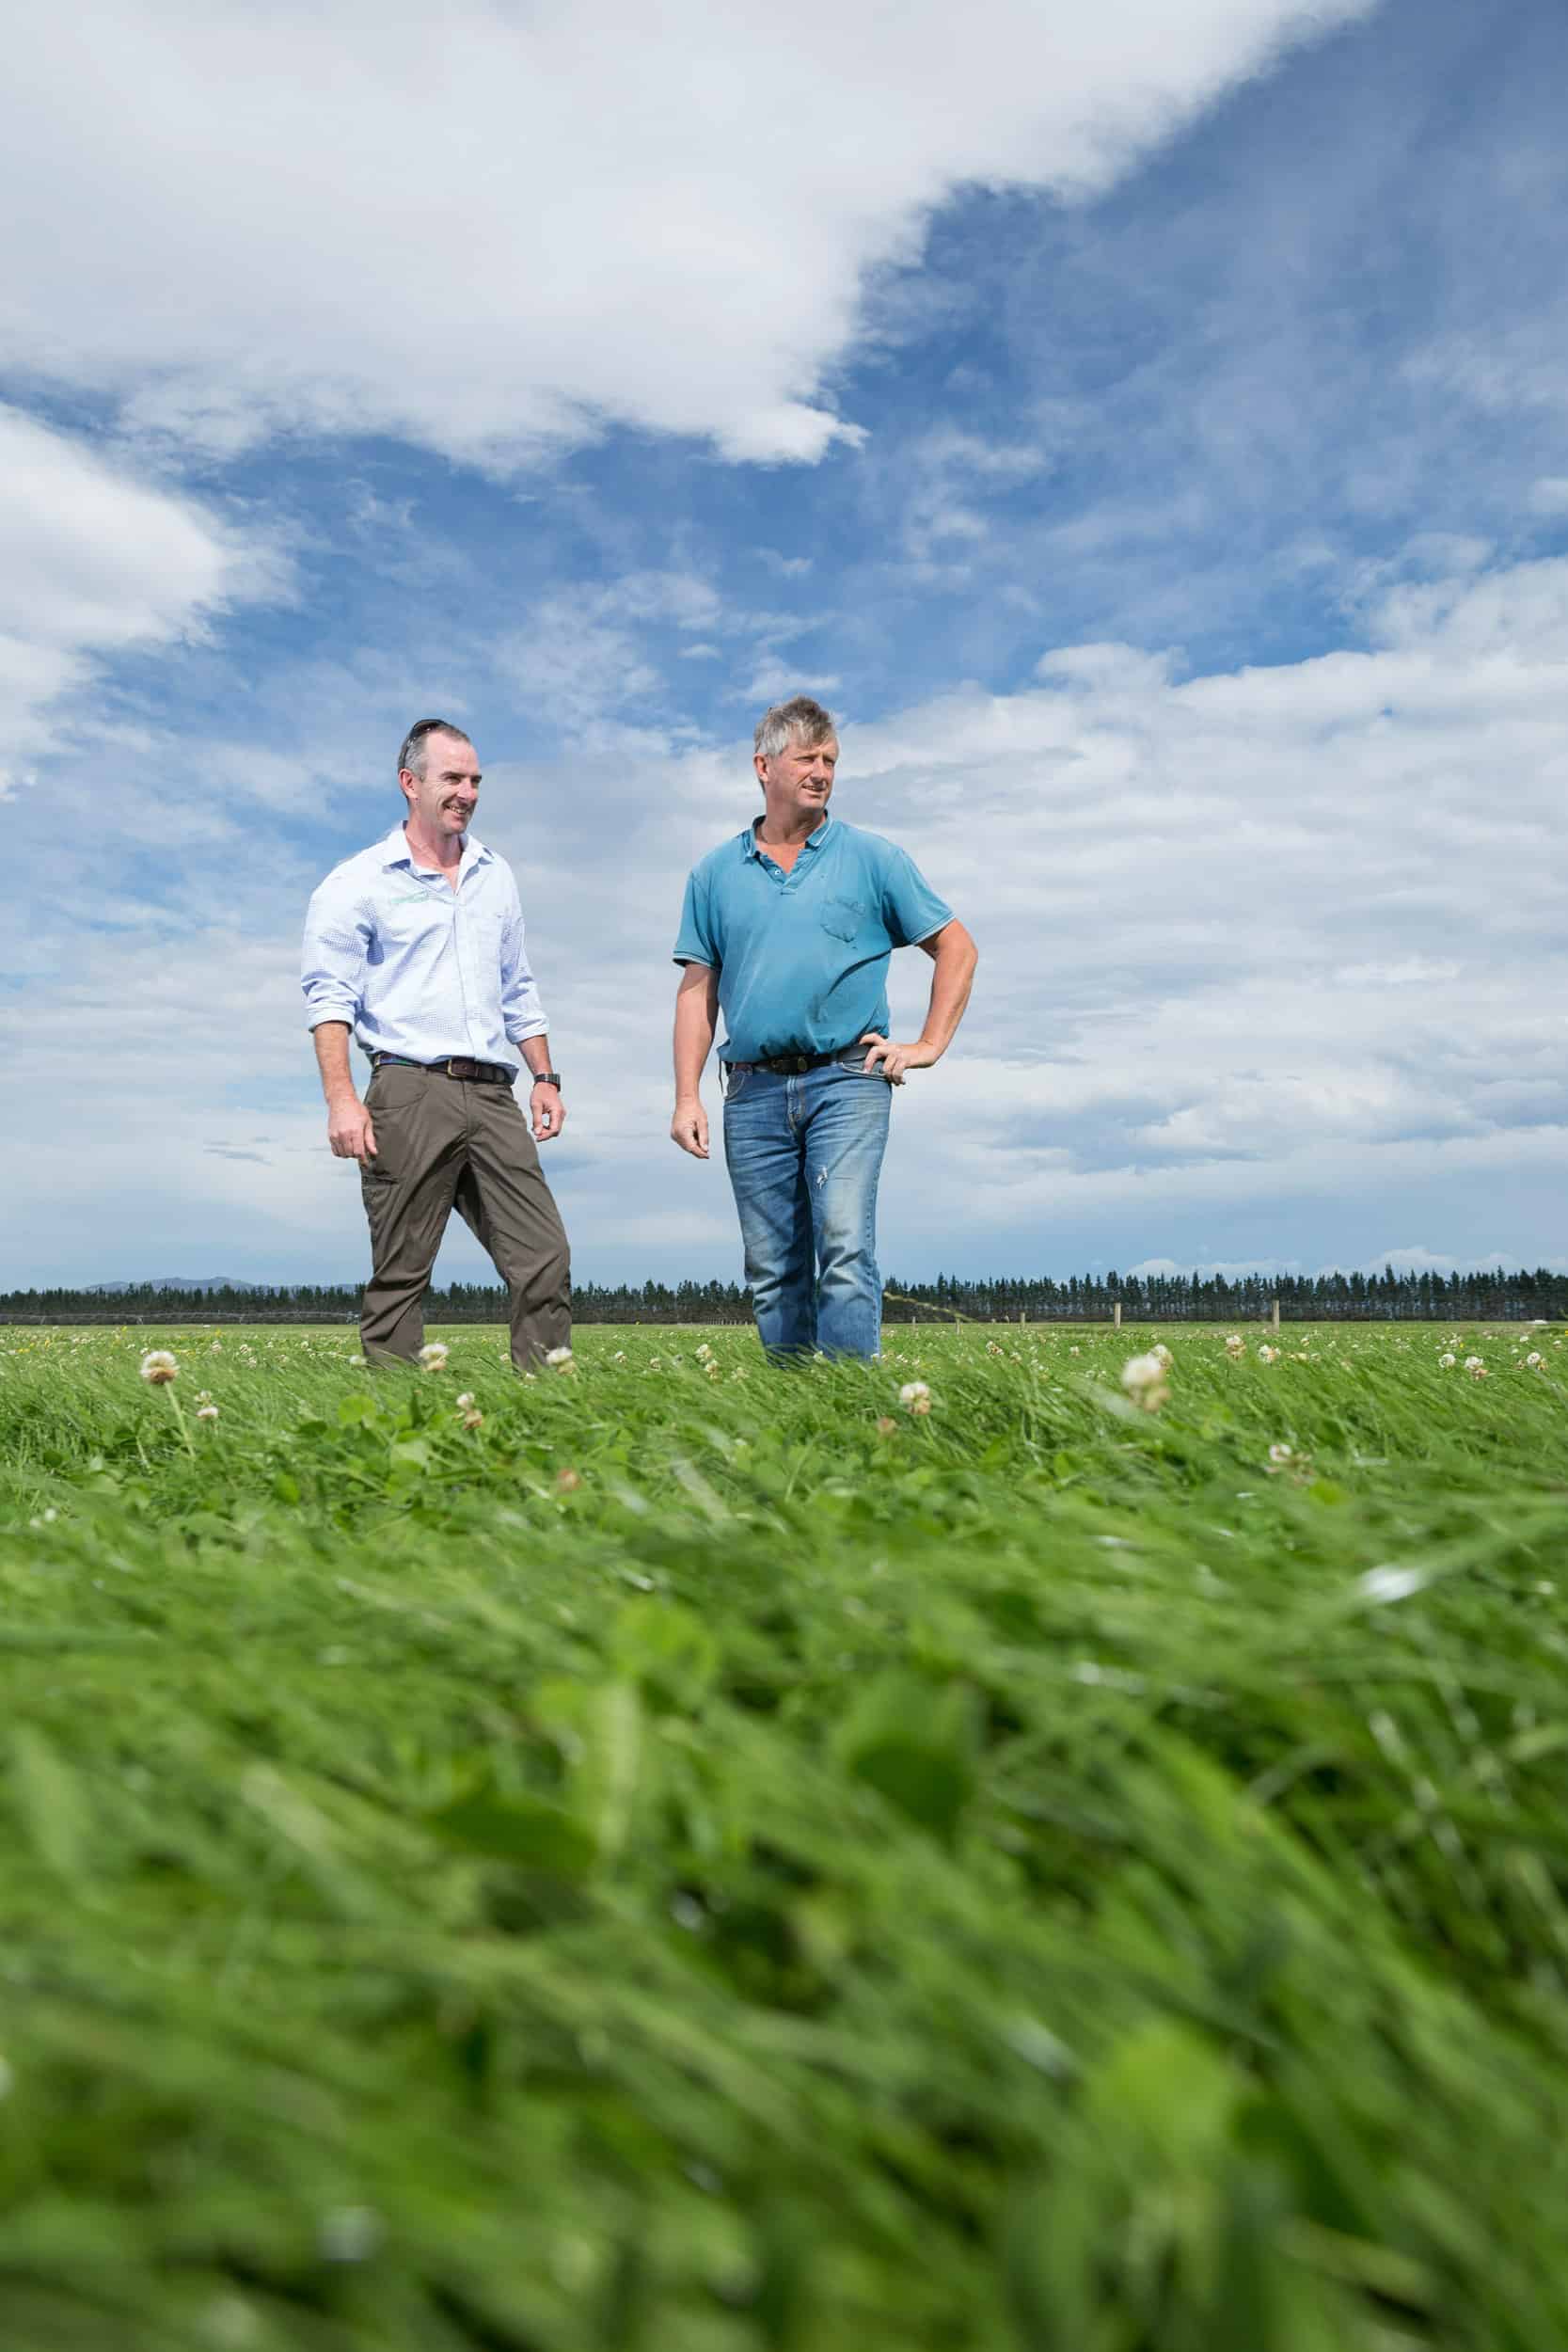 Agri rep meets with farmer in field of long grass.